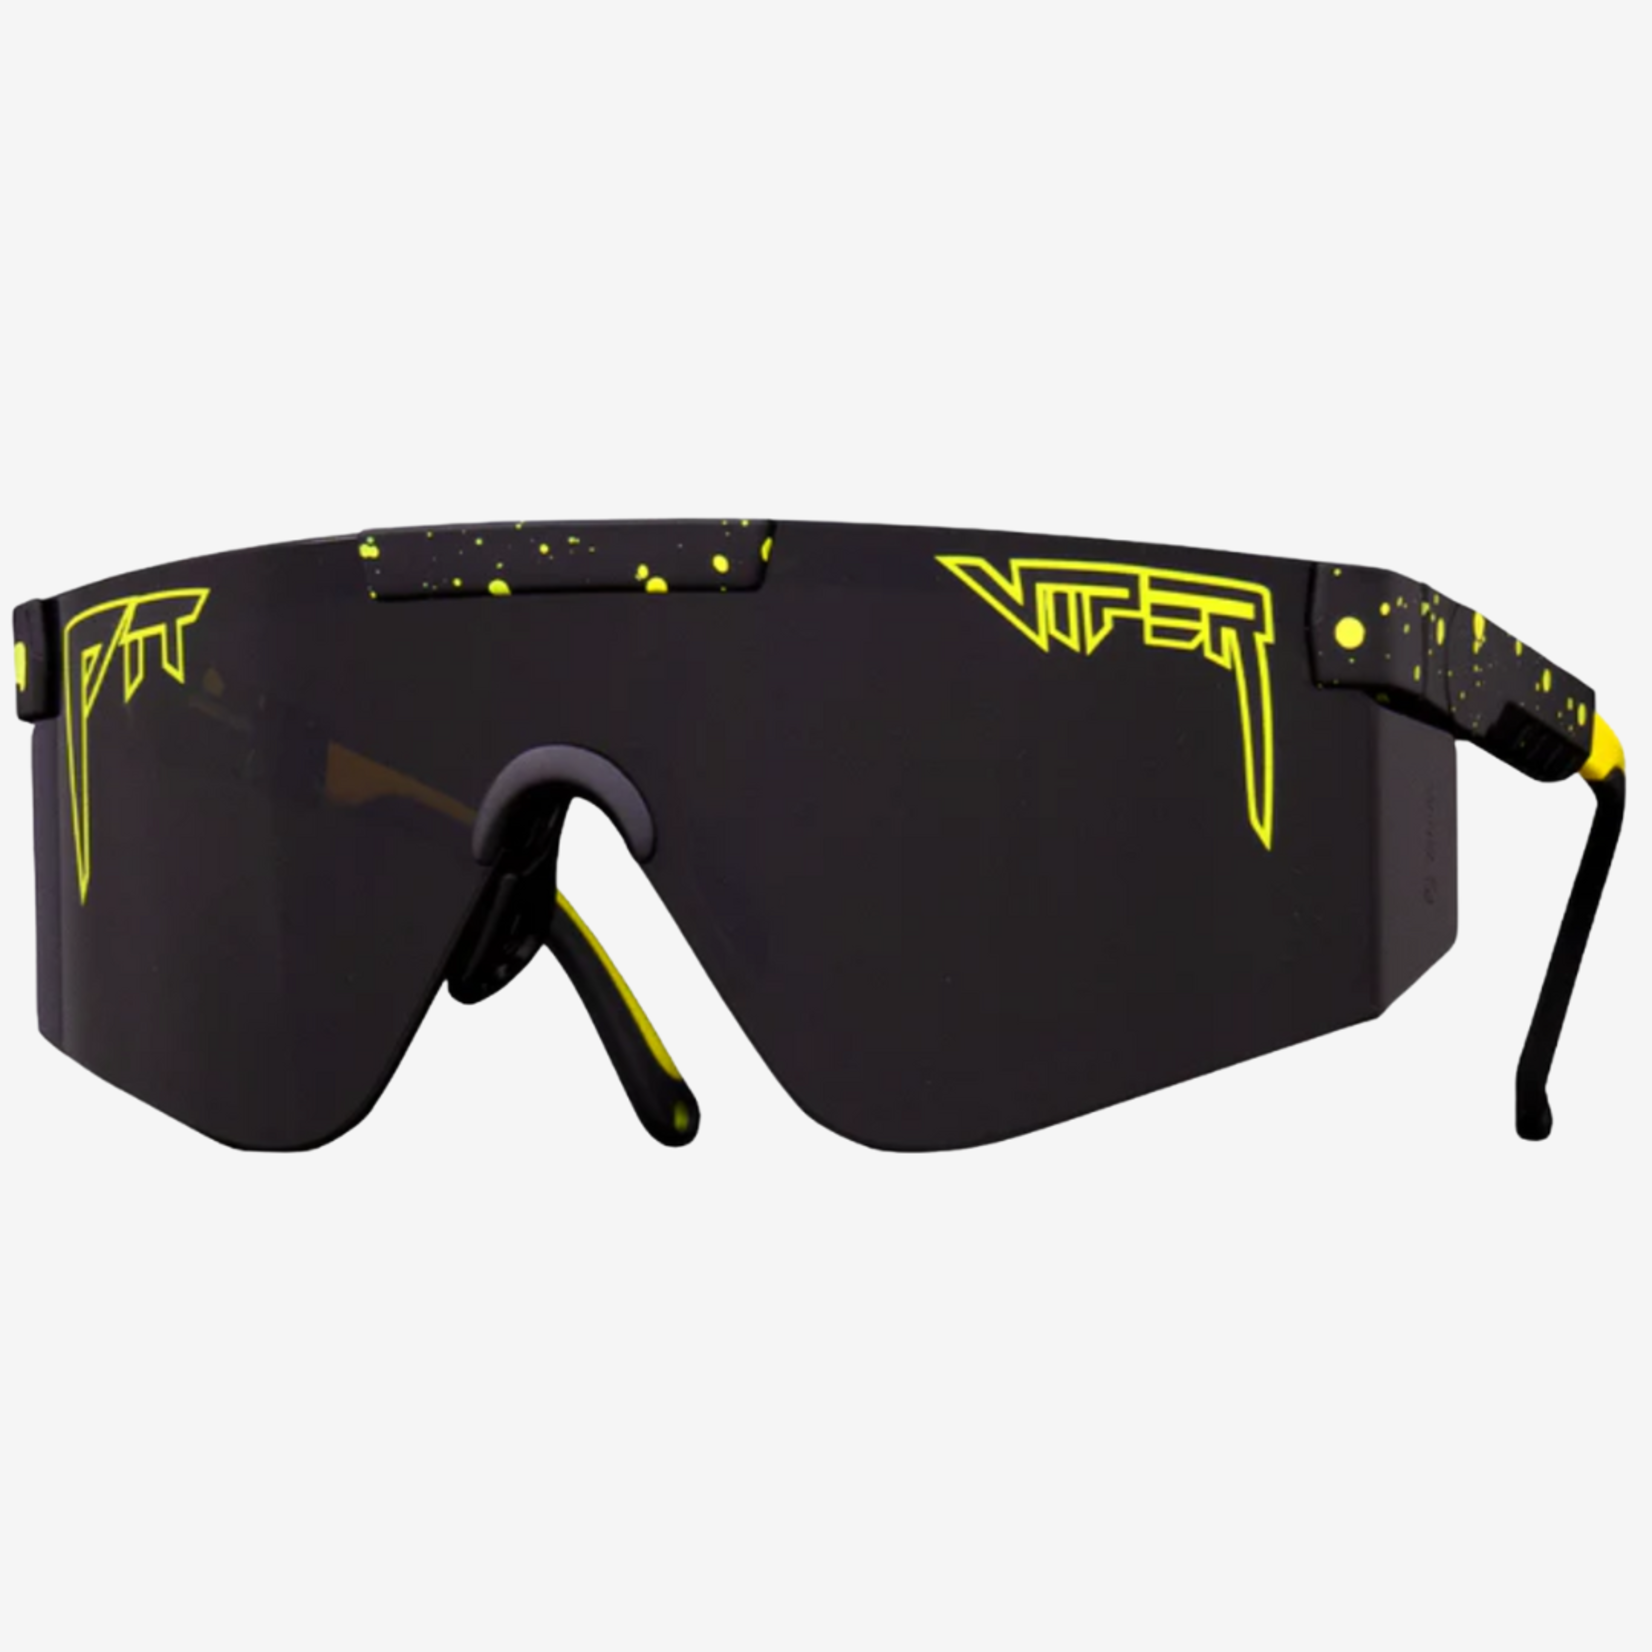 PIT VIPERS 2000S COSMOS Z87+ SUNGLASSES